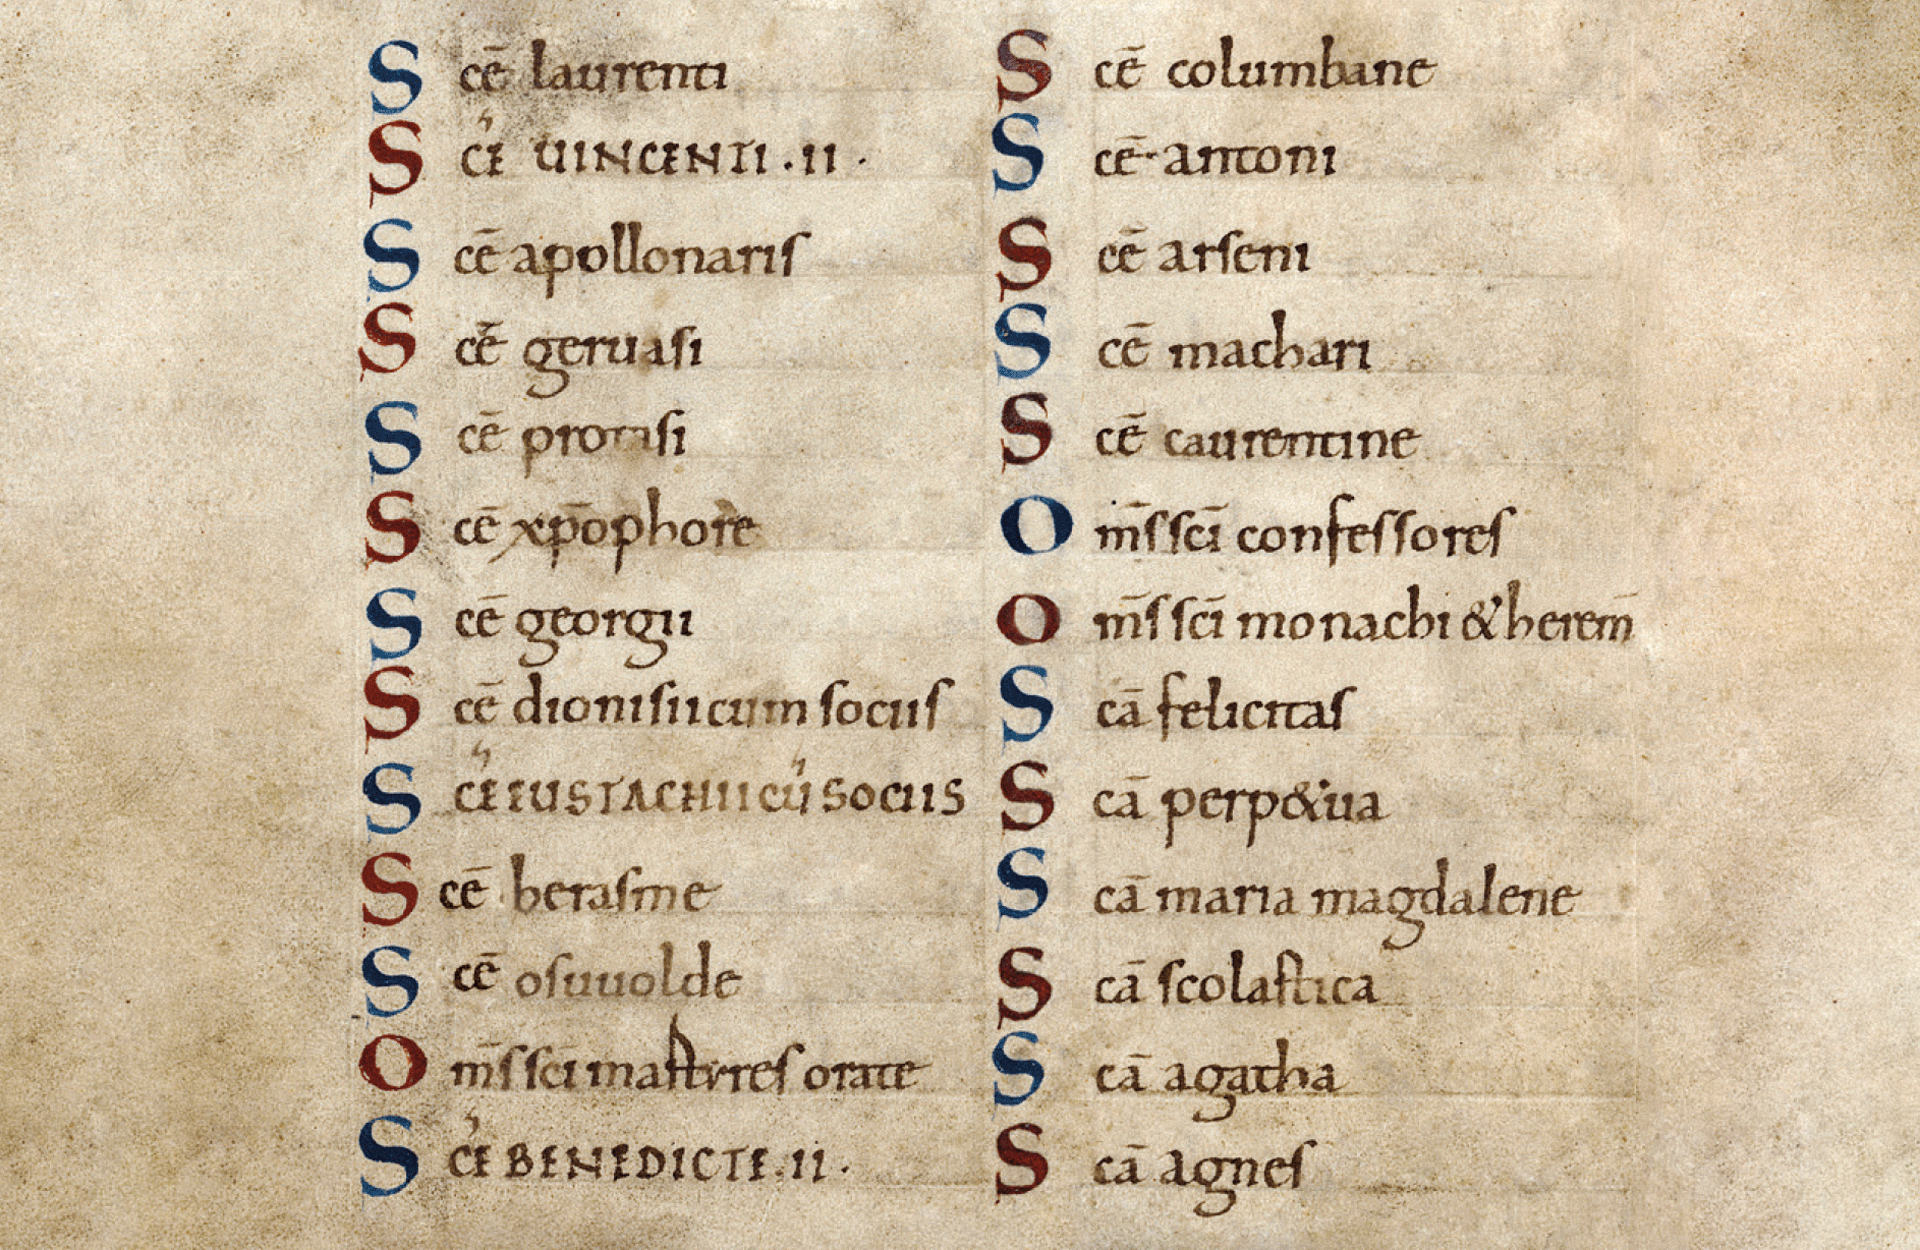 The second litany in the Becket psalter